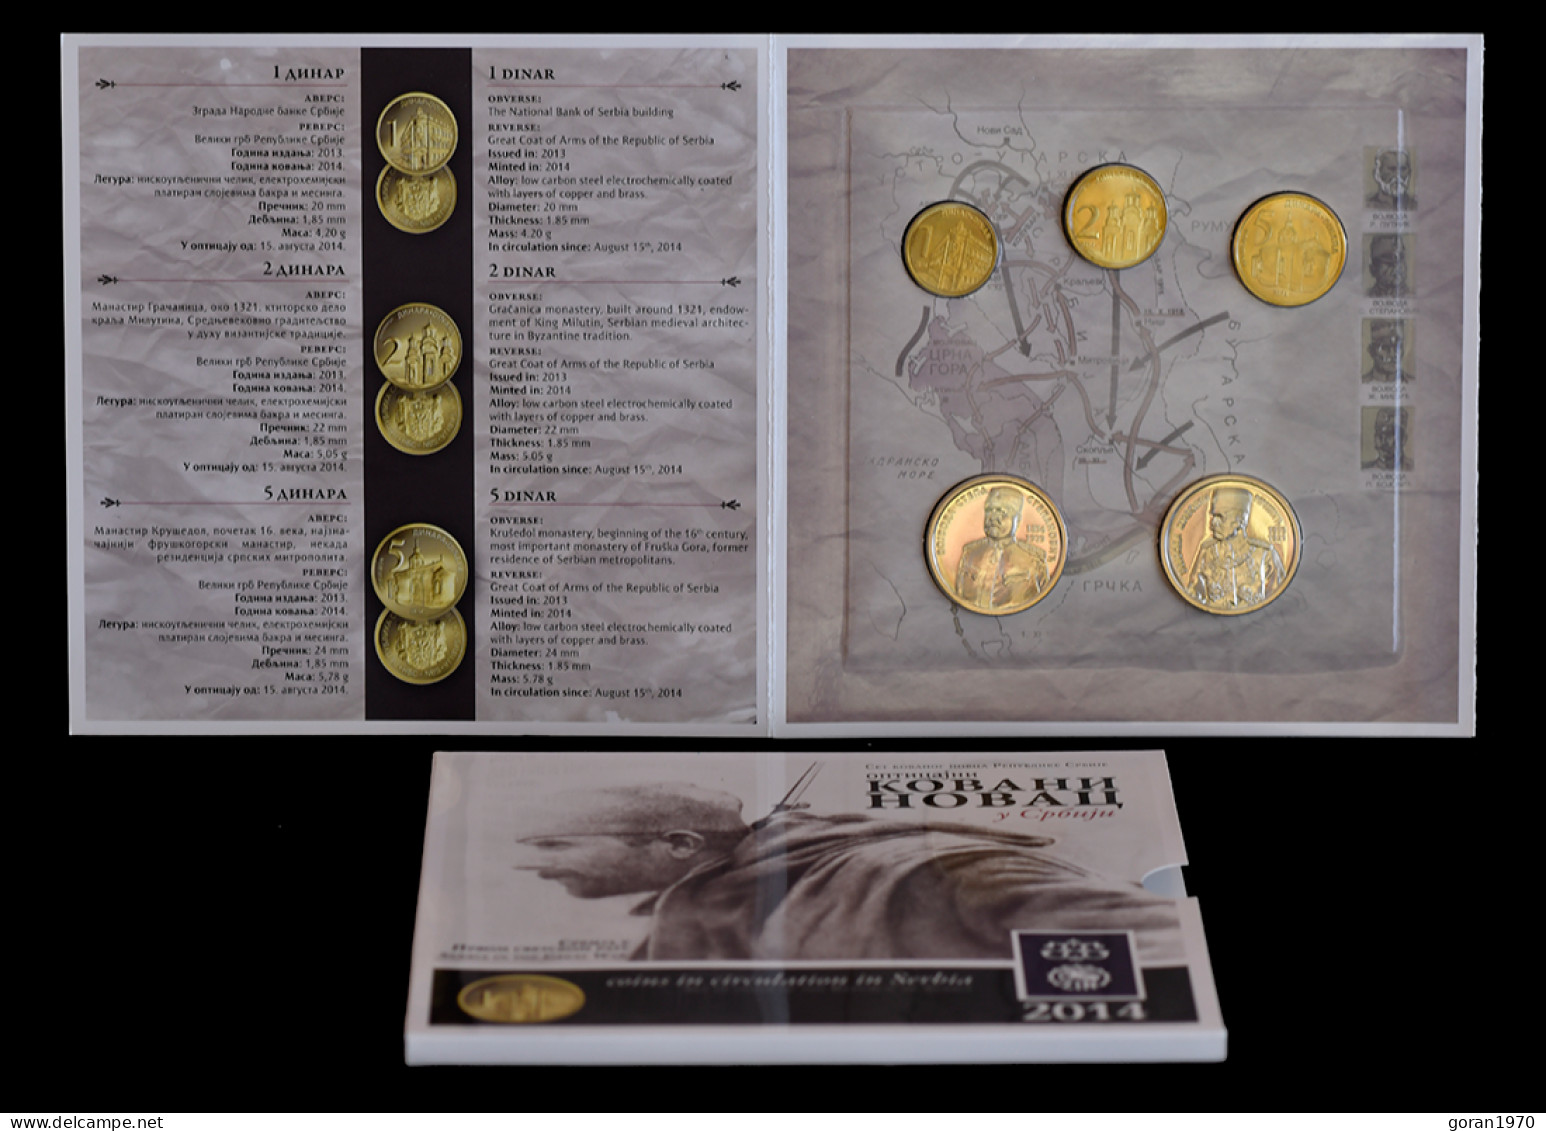 SERBIA Coin Set (1, 2, 5 Dinara + 2 Medals) ISSUED 2014 BY NATIONAL BANK OF SERBIA (Serbia In The Great War) - Serbia